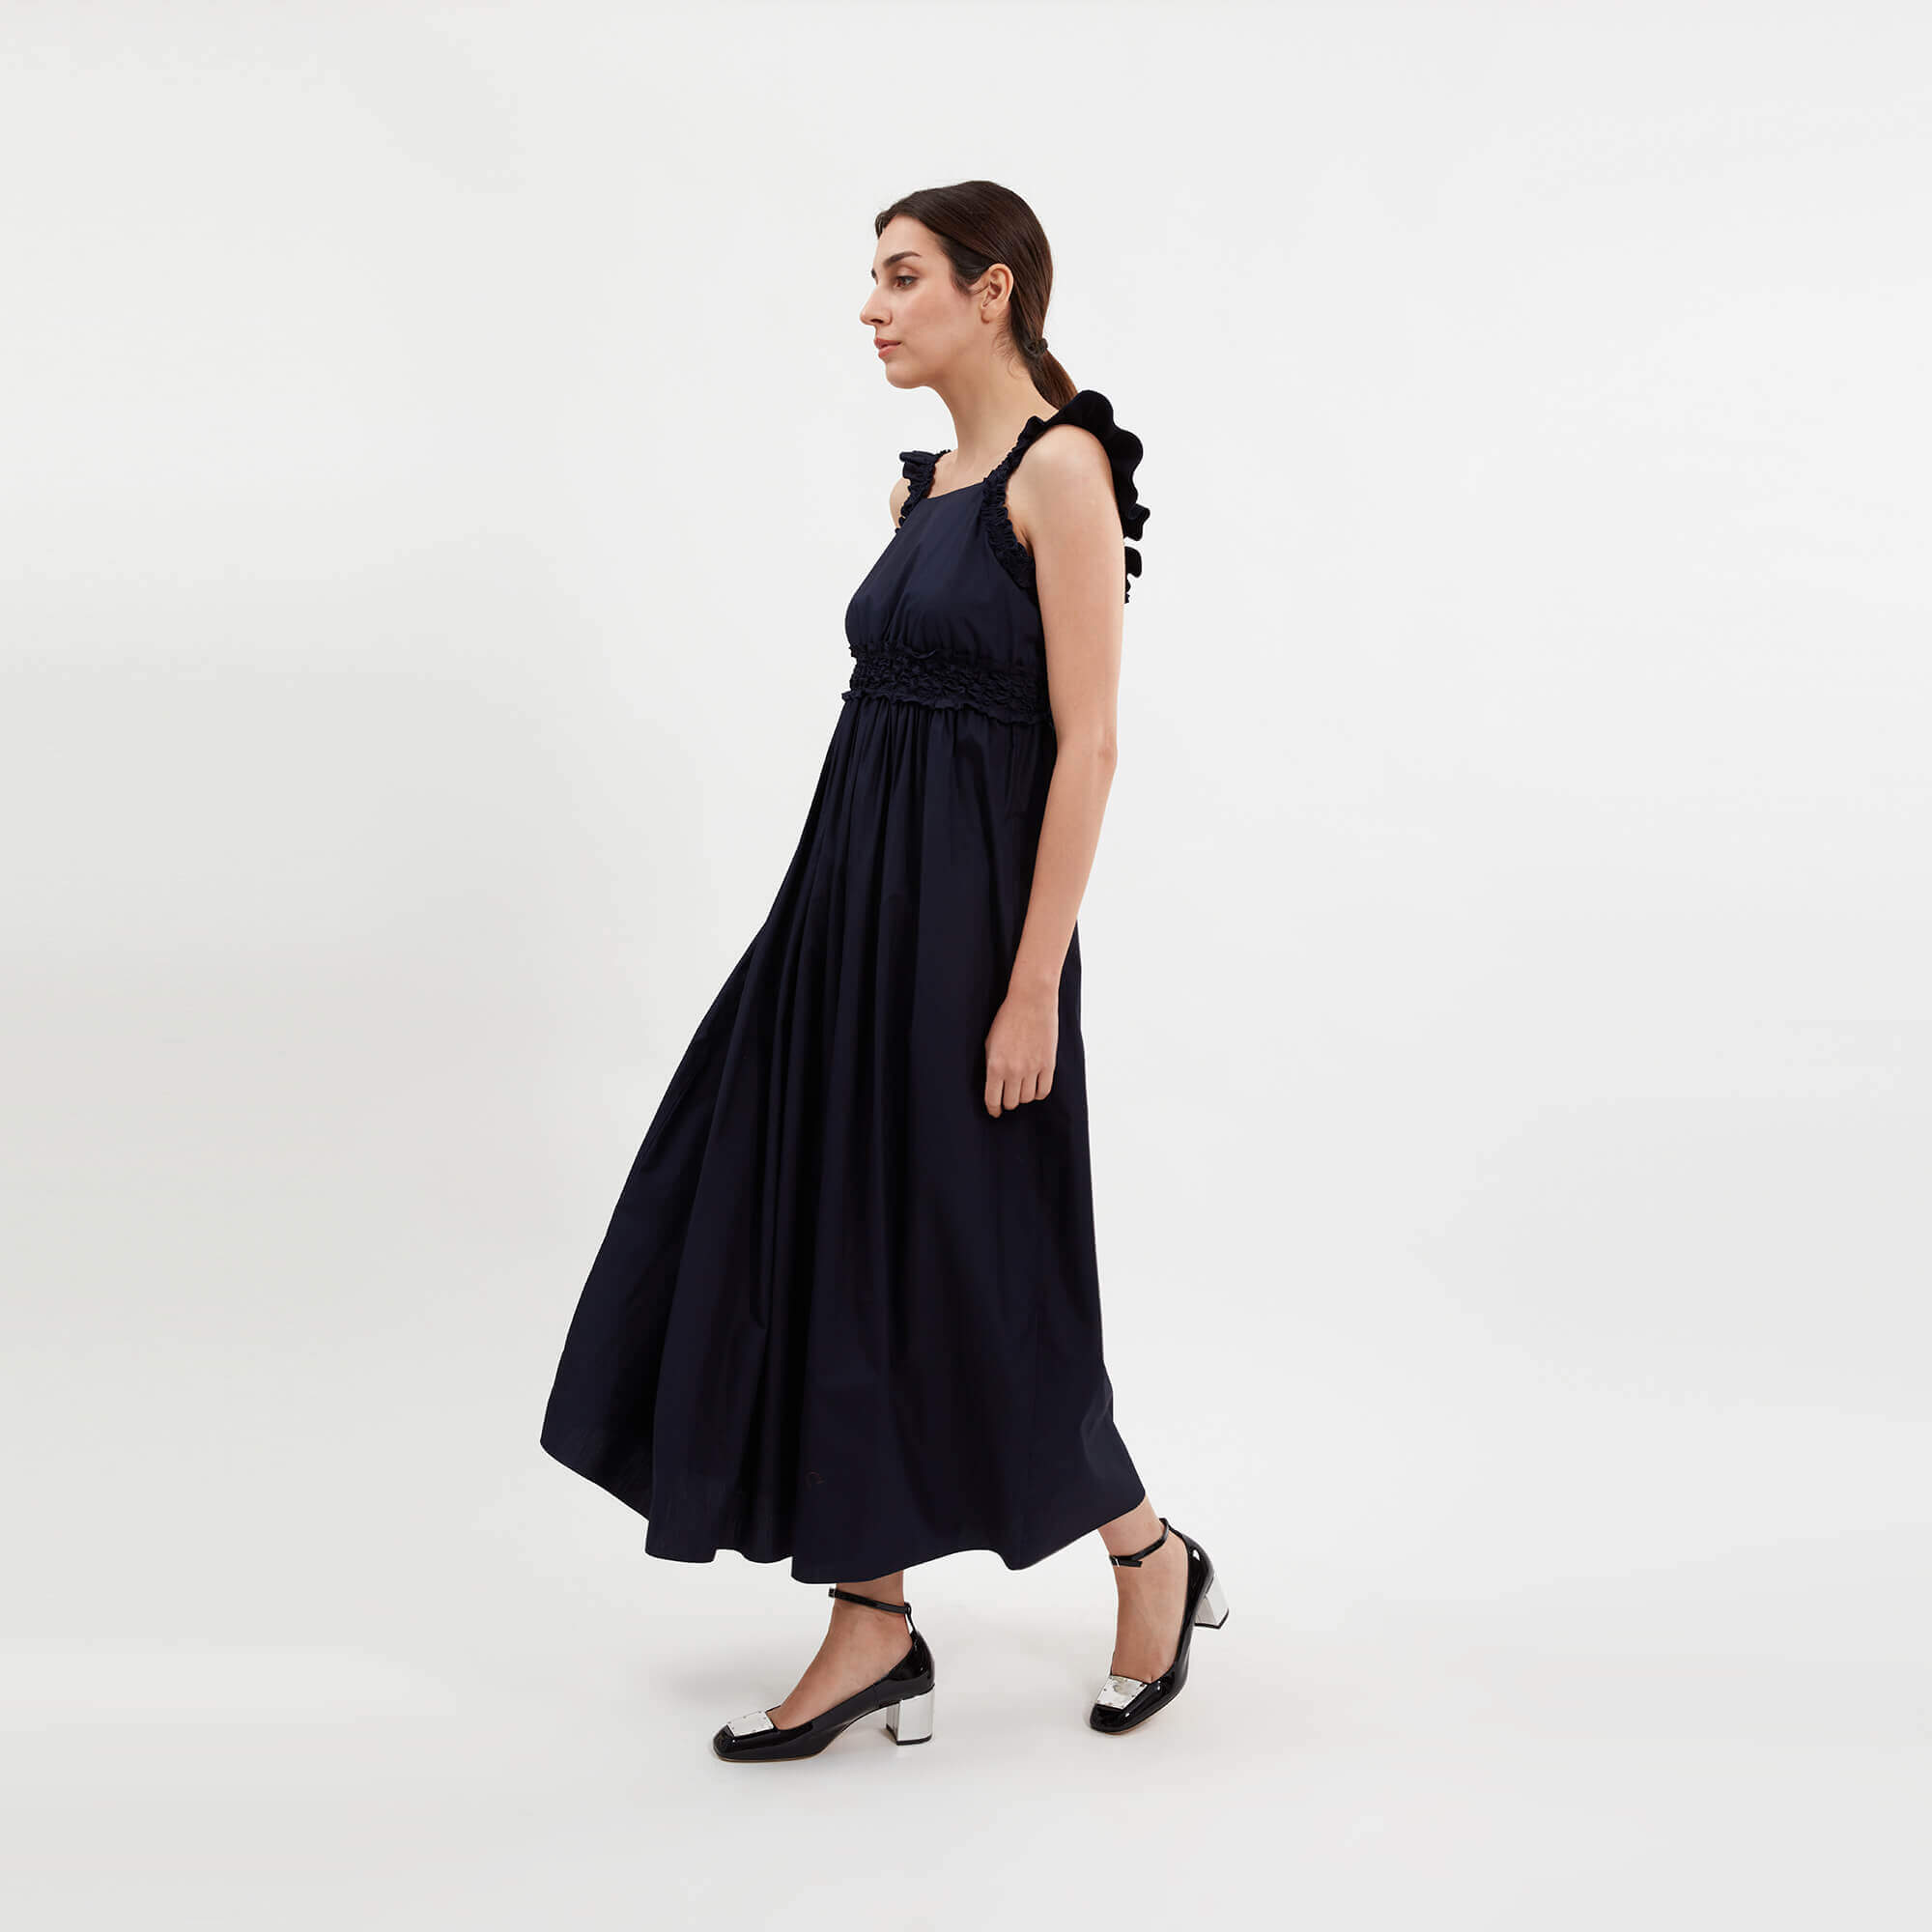 Chloe - Navy Cotton Ruffle Details Straped Ruched Dress